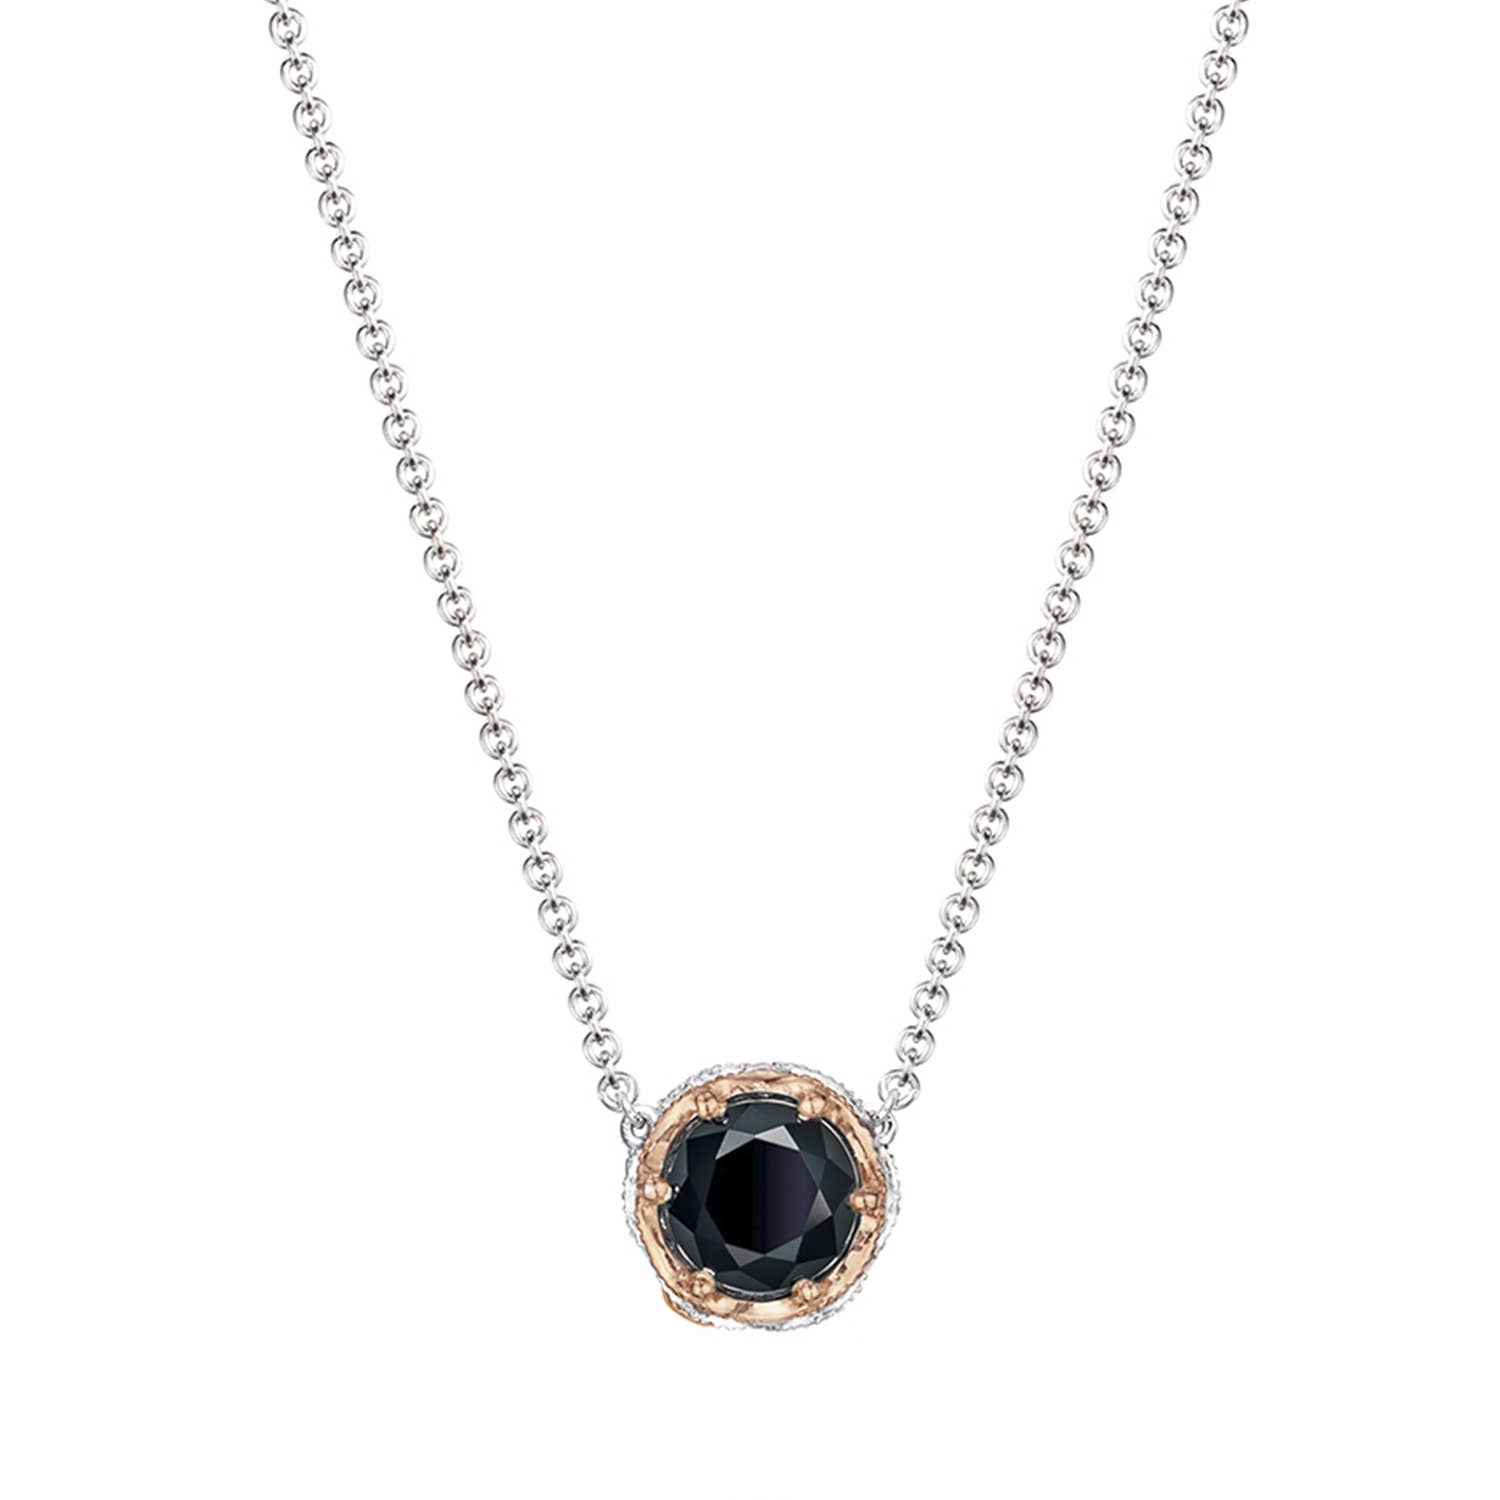 Crescent Station Necklace featuring Black Onyx